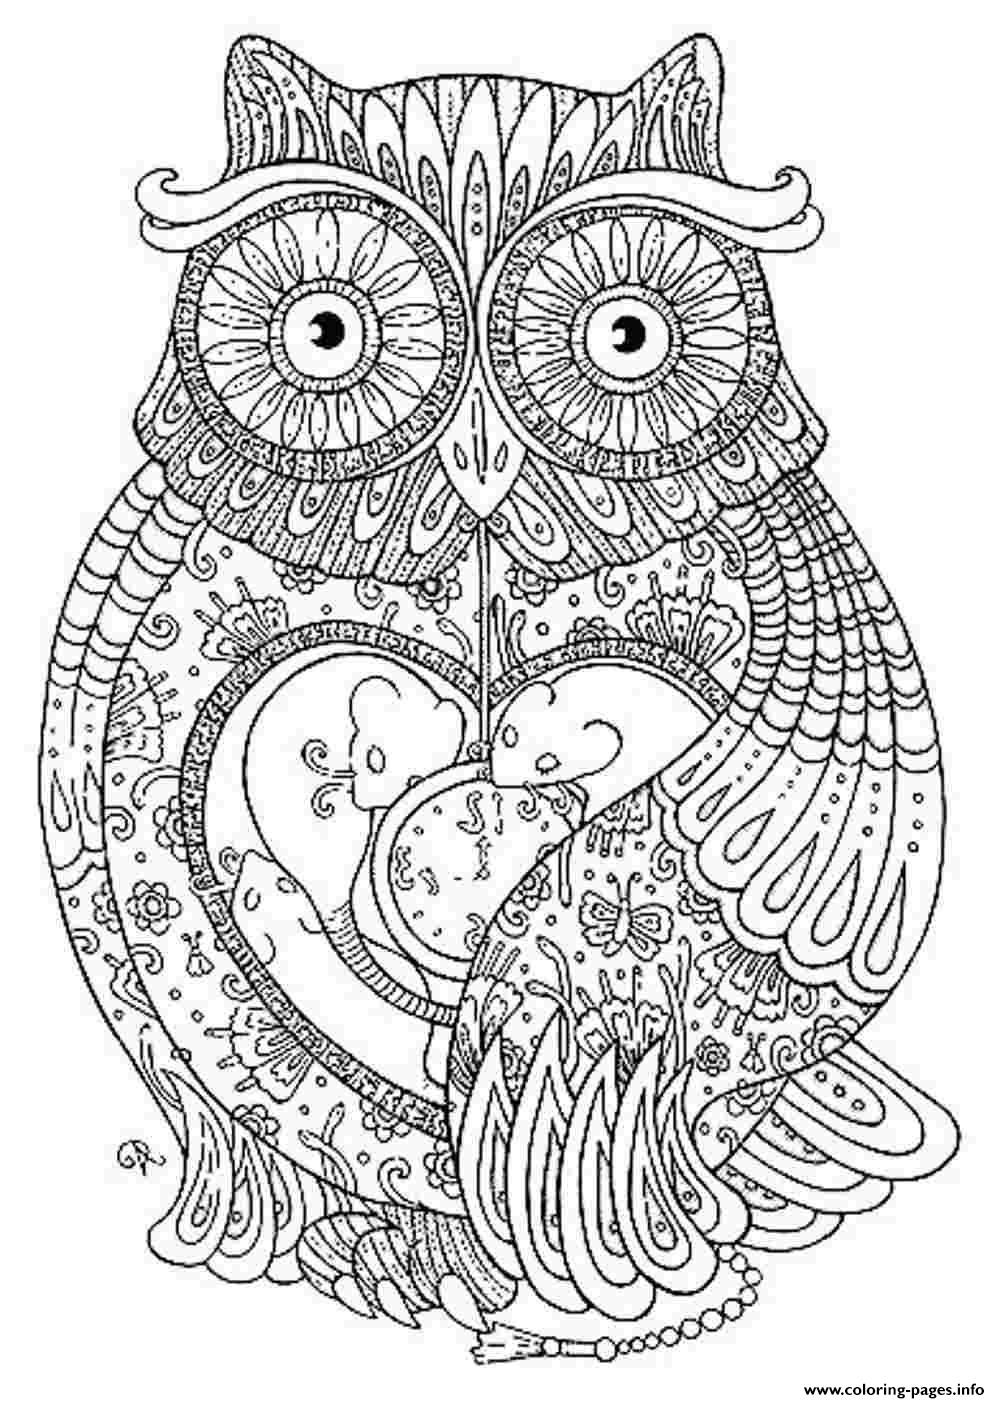 Coloring Pages For Adults Animals
 Animal Coloring Pages For Adults Coloring Pages Printable